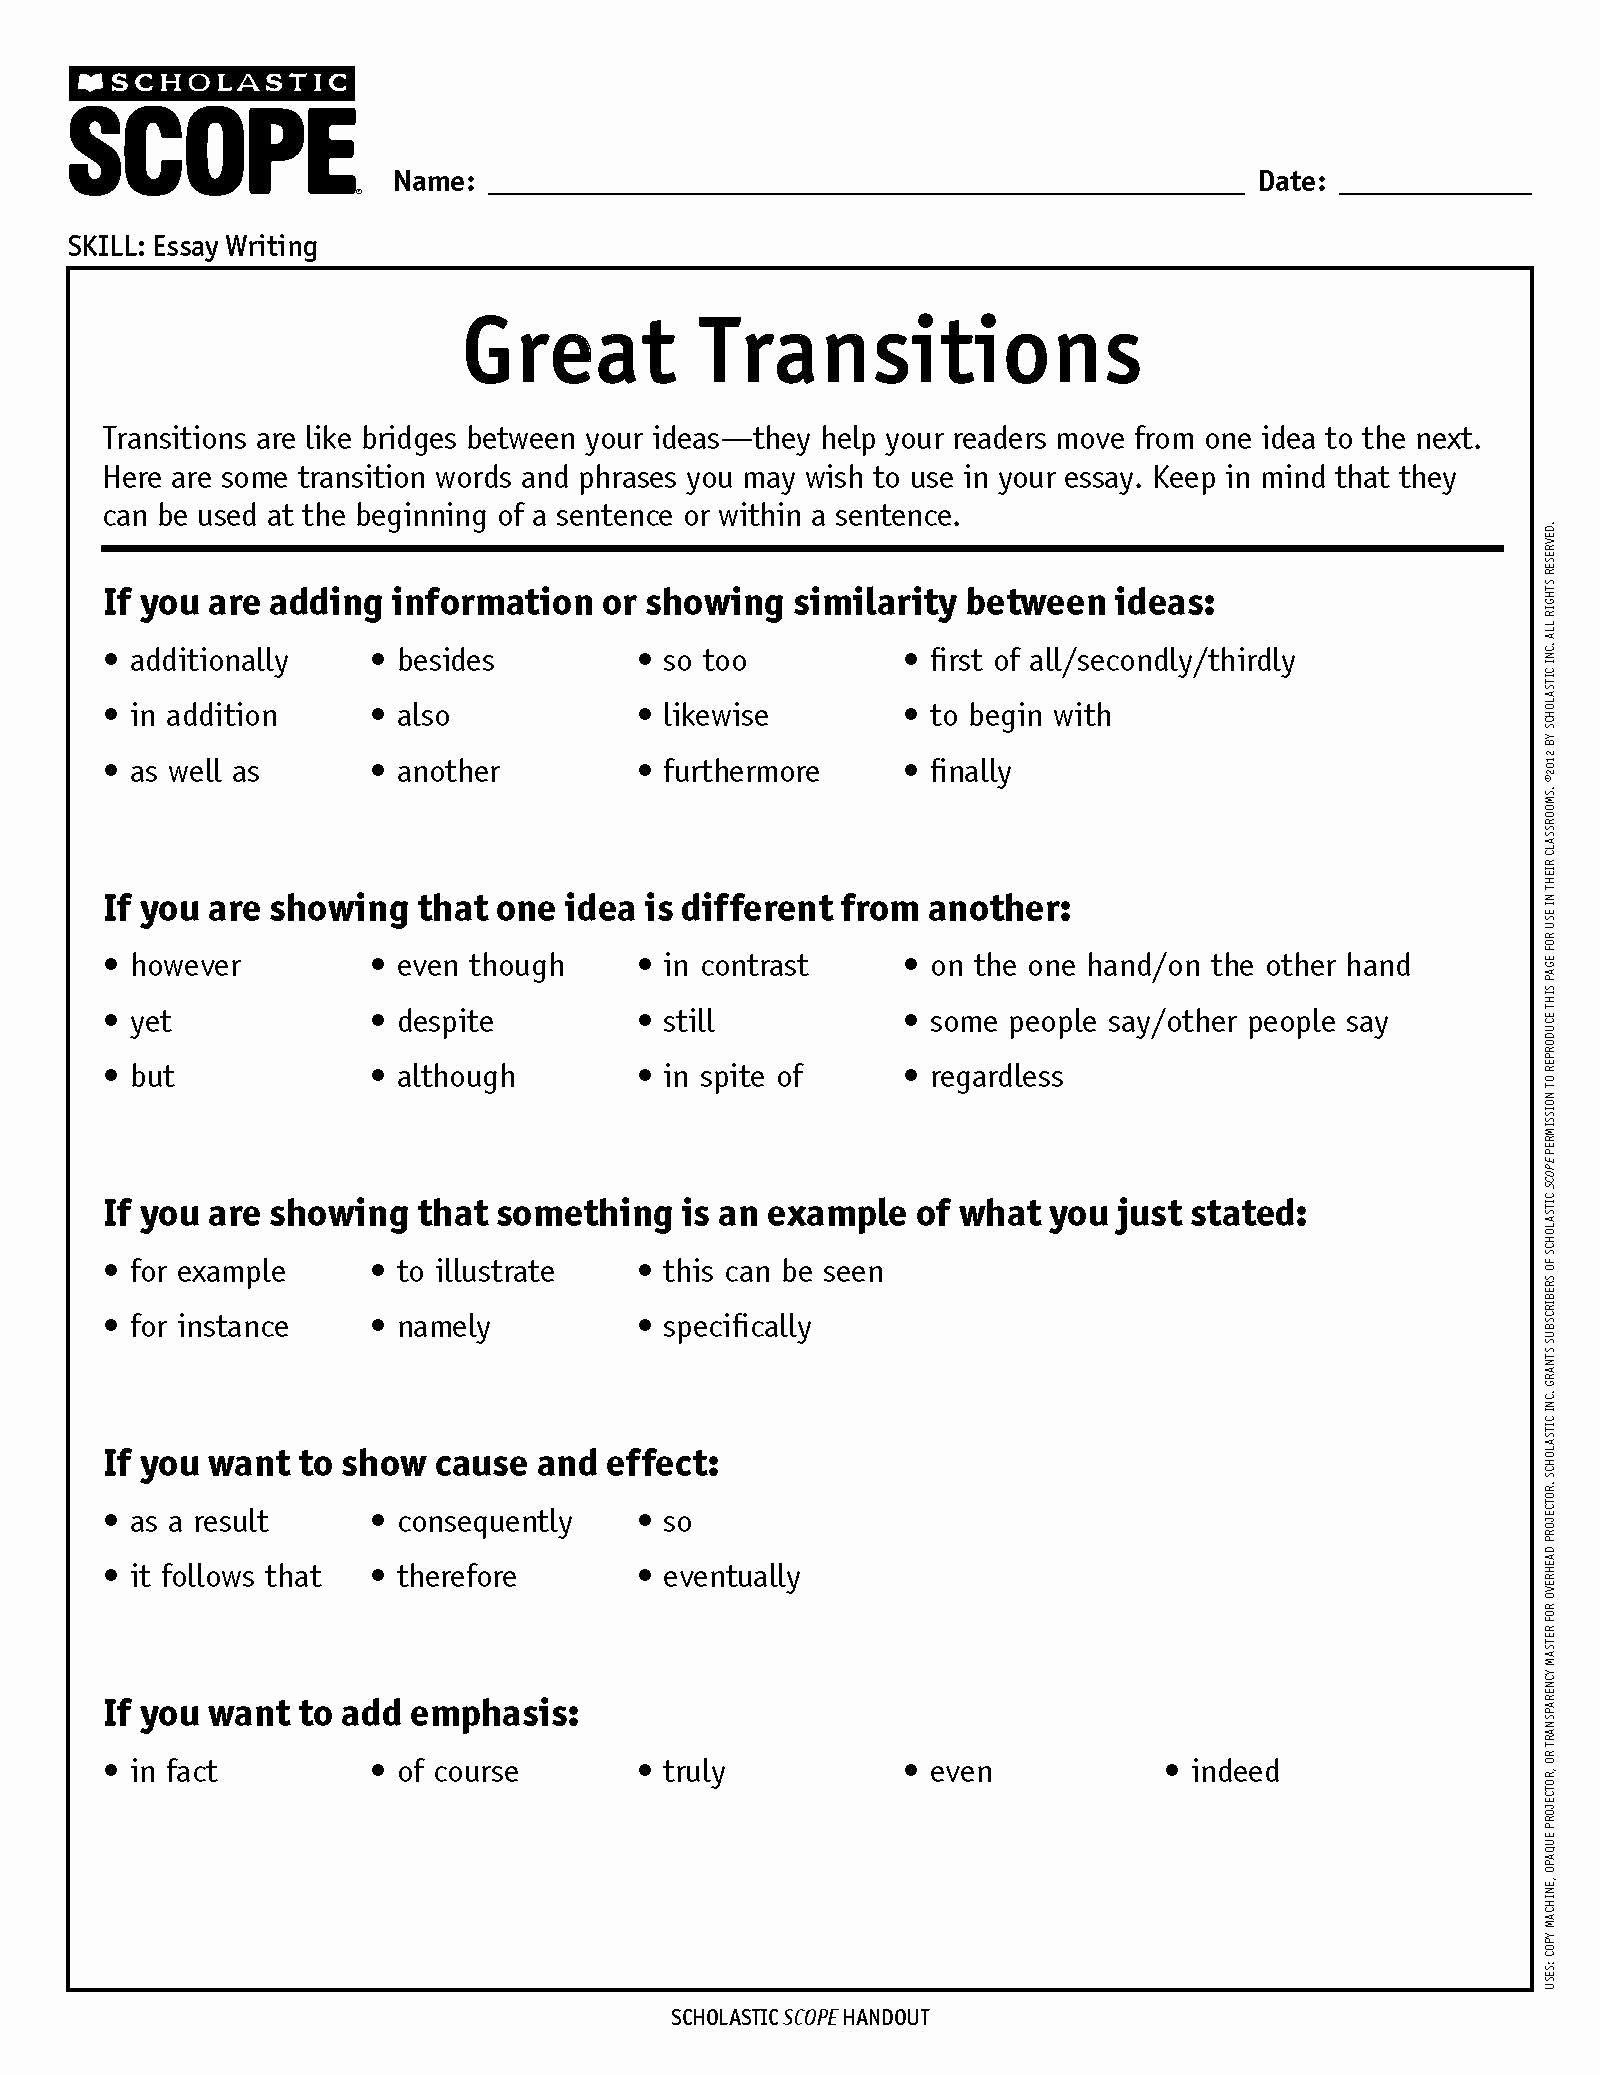 Good Transition Words for Essays by Experts - 